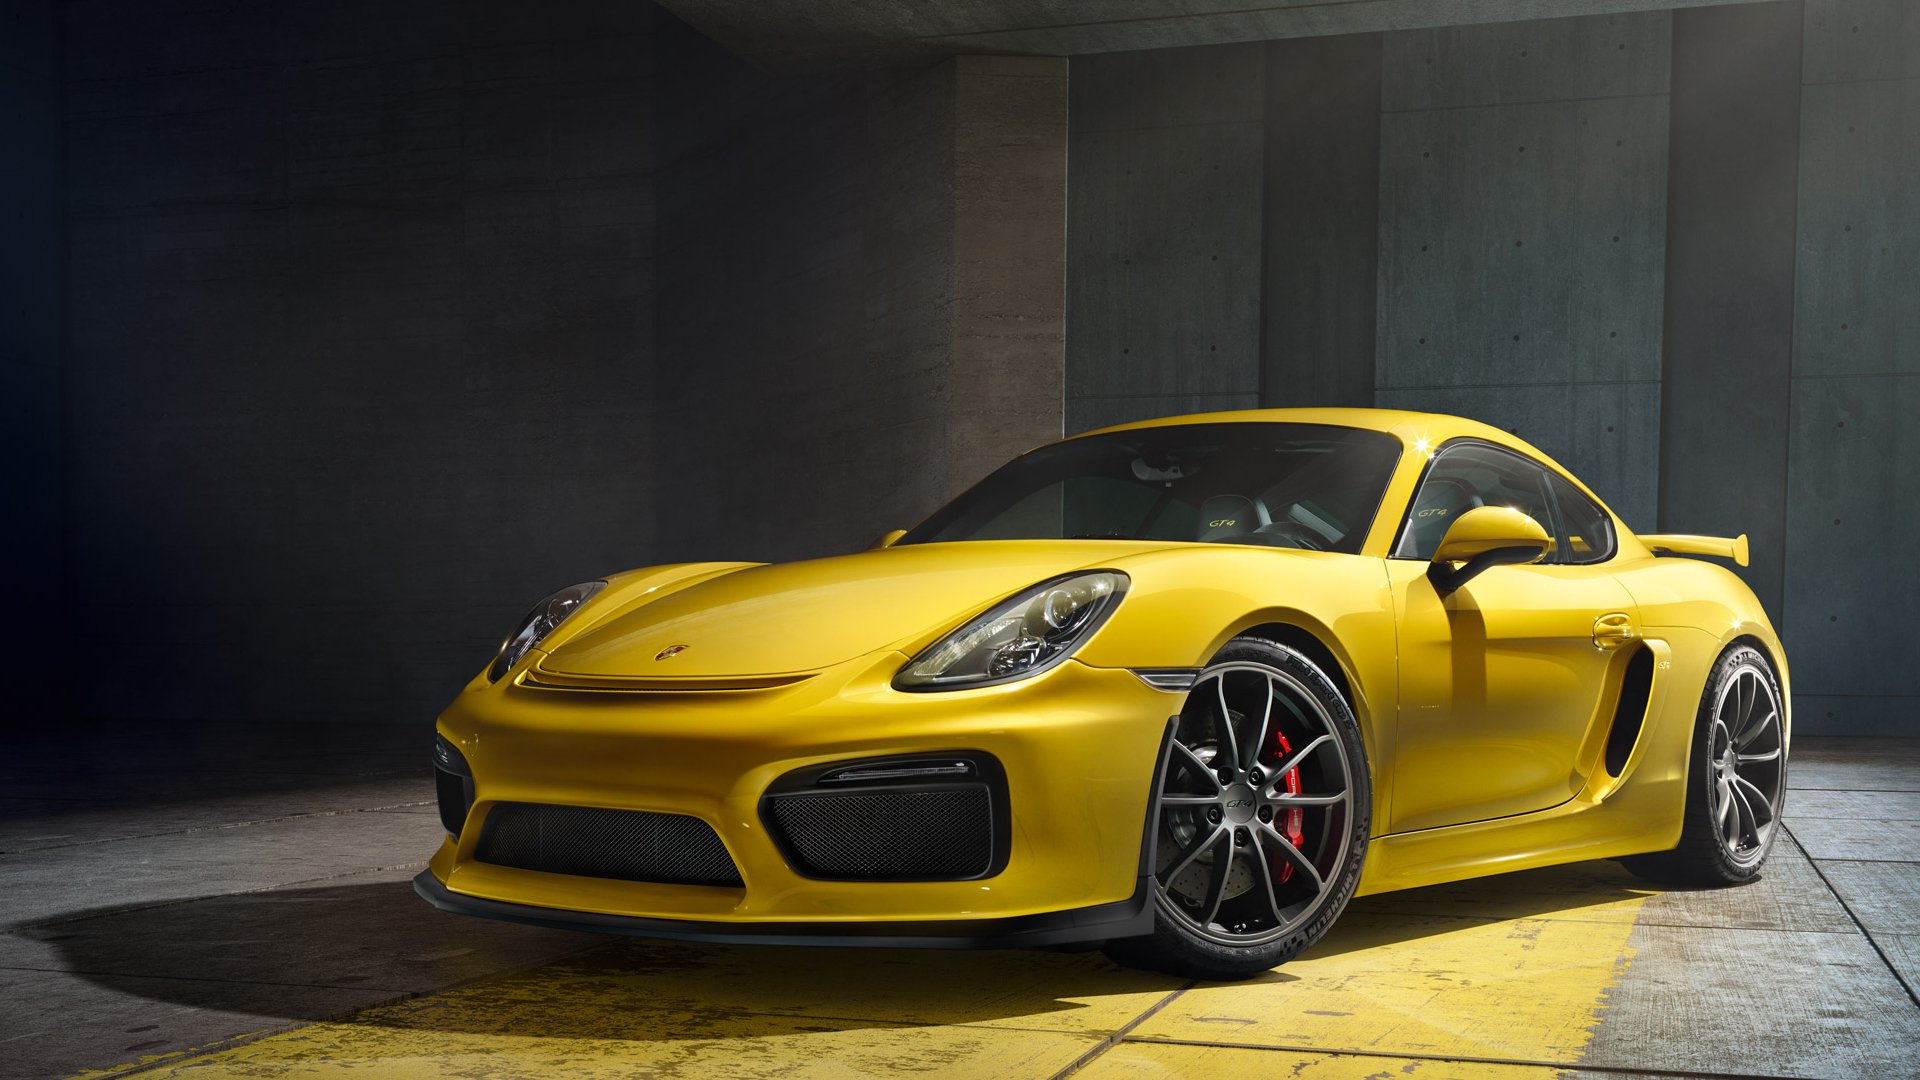 Porsche Cayman GT4 Ultimate Guide: Review, Price, Specs, Videos & More